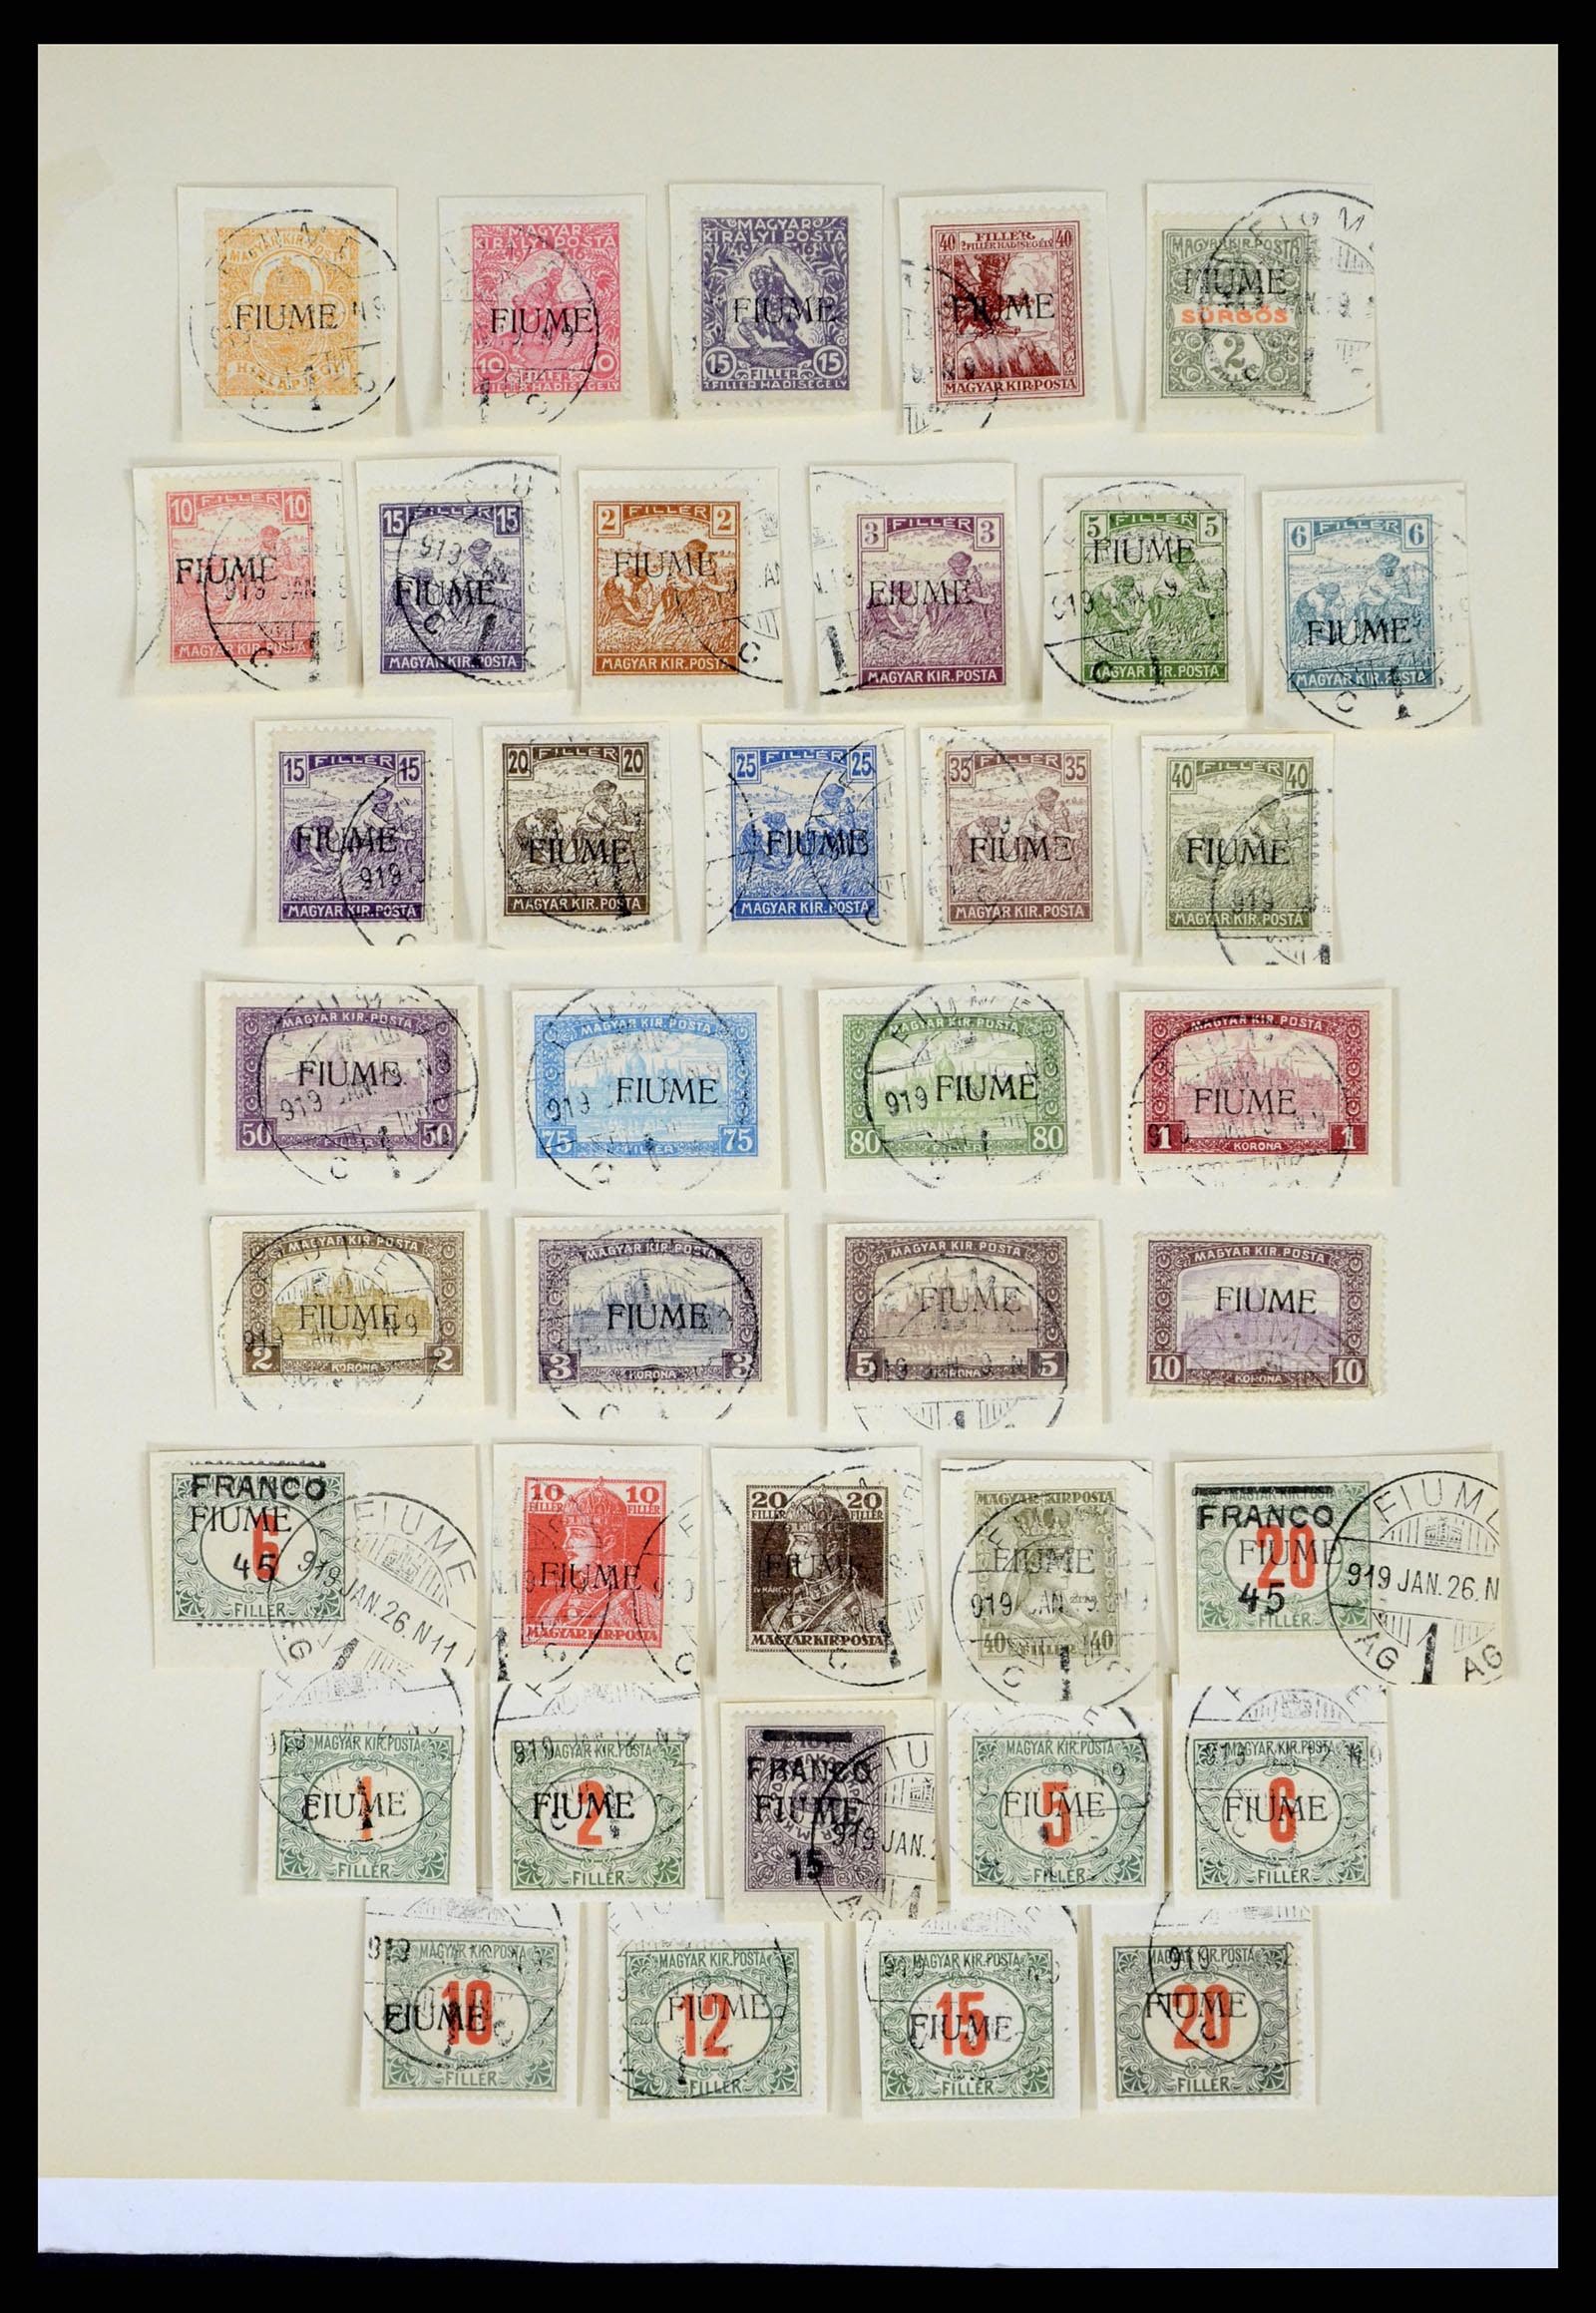 37865 017 - Stamp Collection 37865 Fiume 1920-1924.